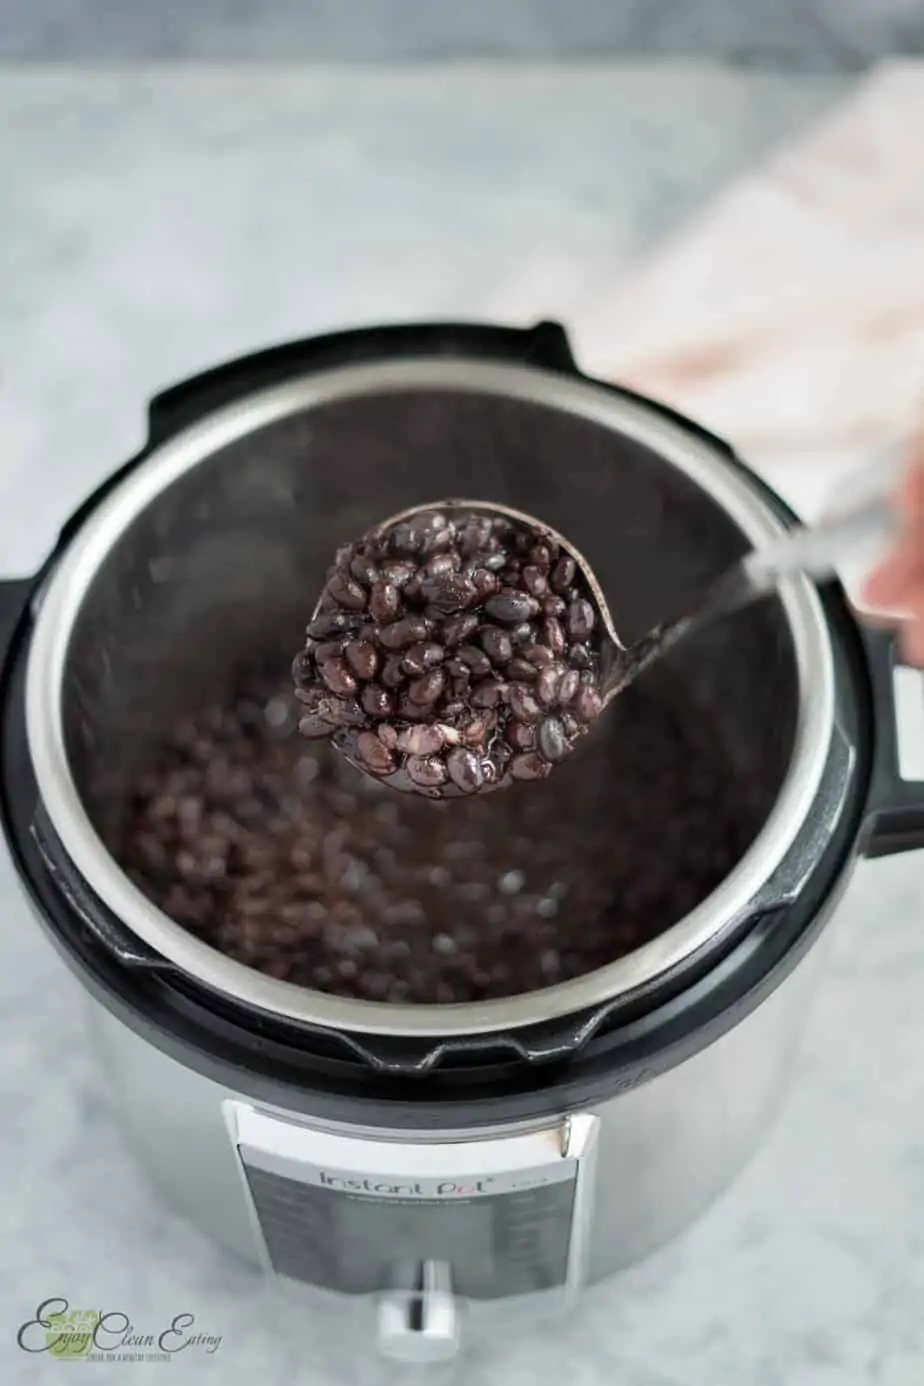 holding a soup serving spoon full of the fresh instant pot black beans